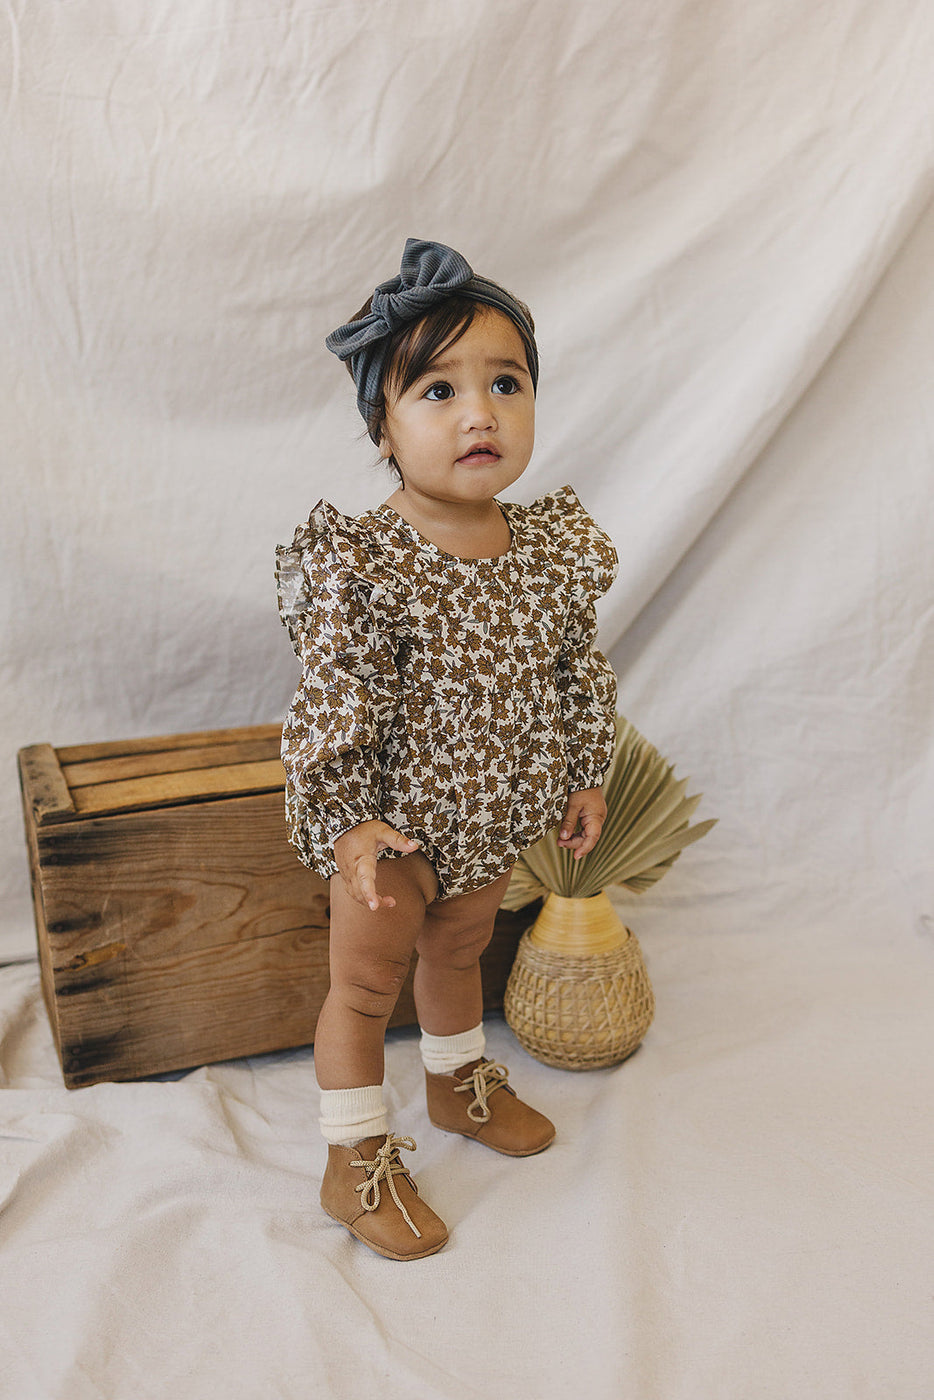 a baby standing next to a wooden box